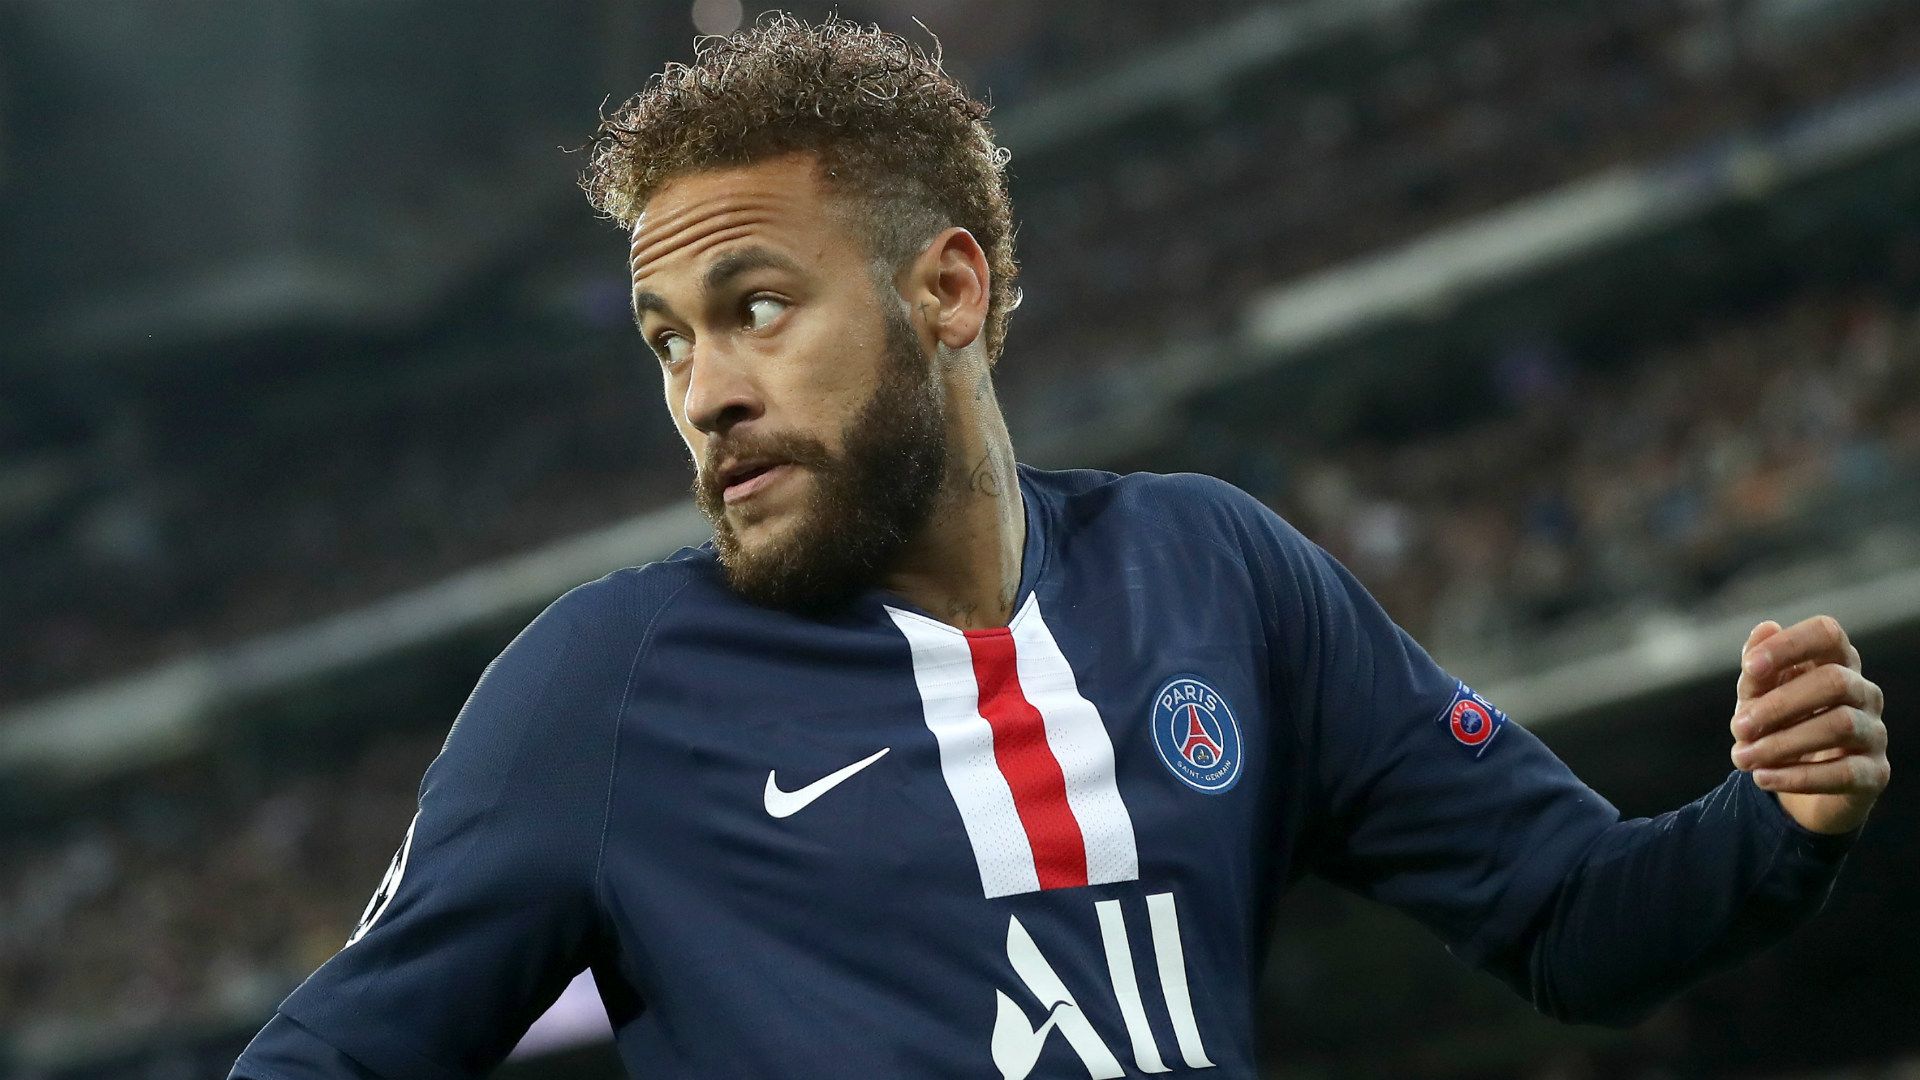 Barcelona transfer targets: Neymar, Lautaro & players linked with the club